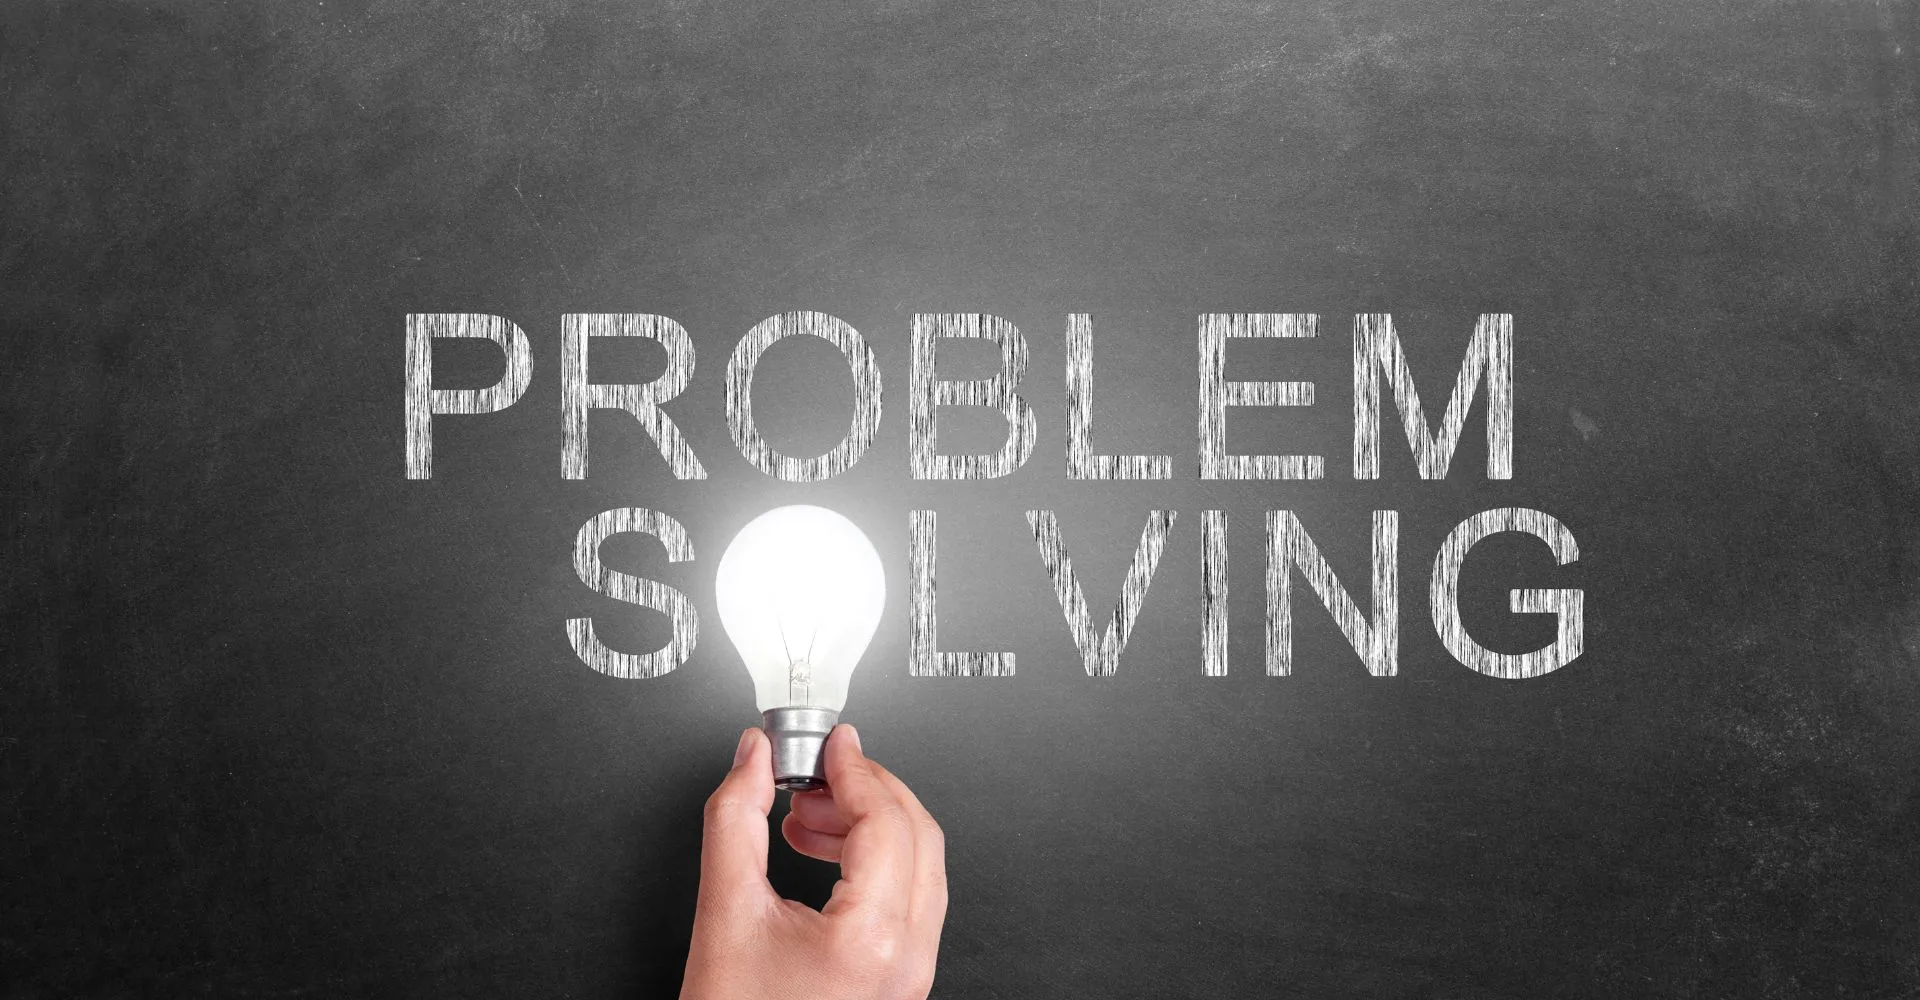 Effective Problem Solving in 5 Simple Steps by Synergogy